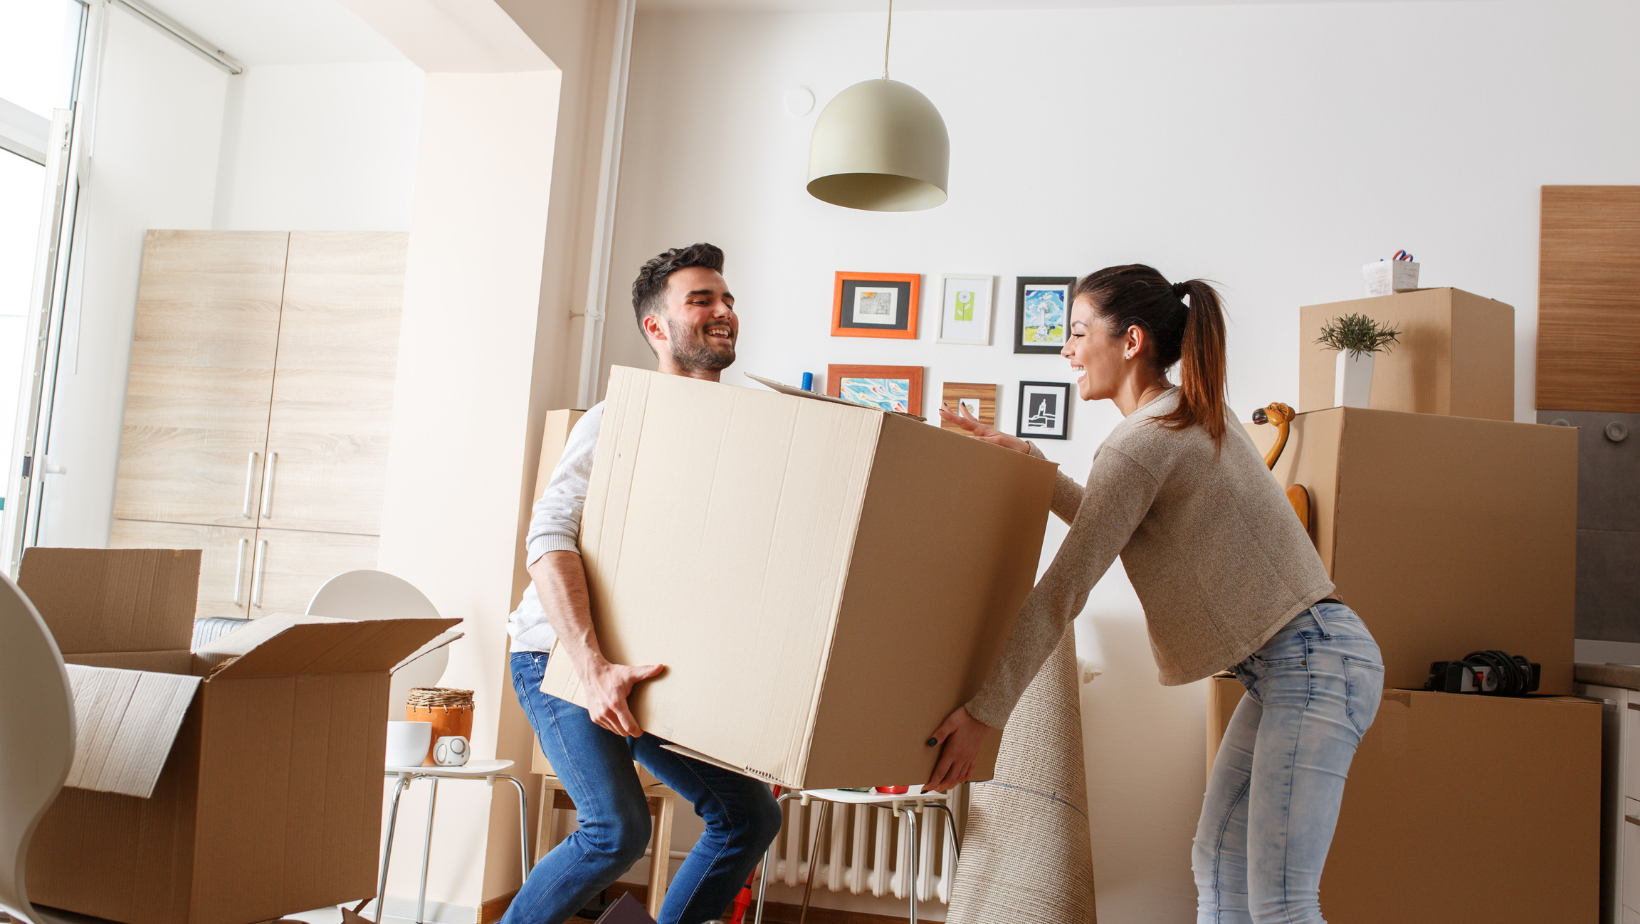 10 Best Ways to Protect Your Walls When Moving